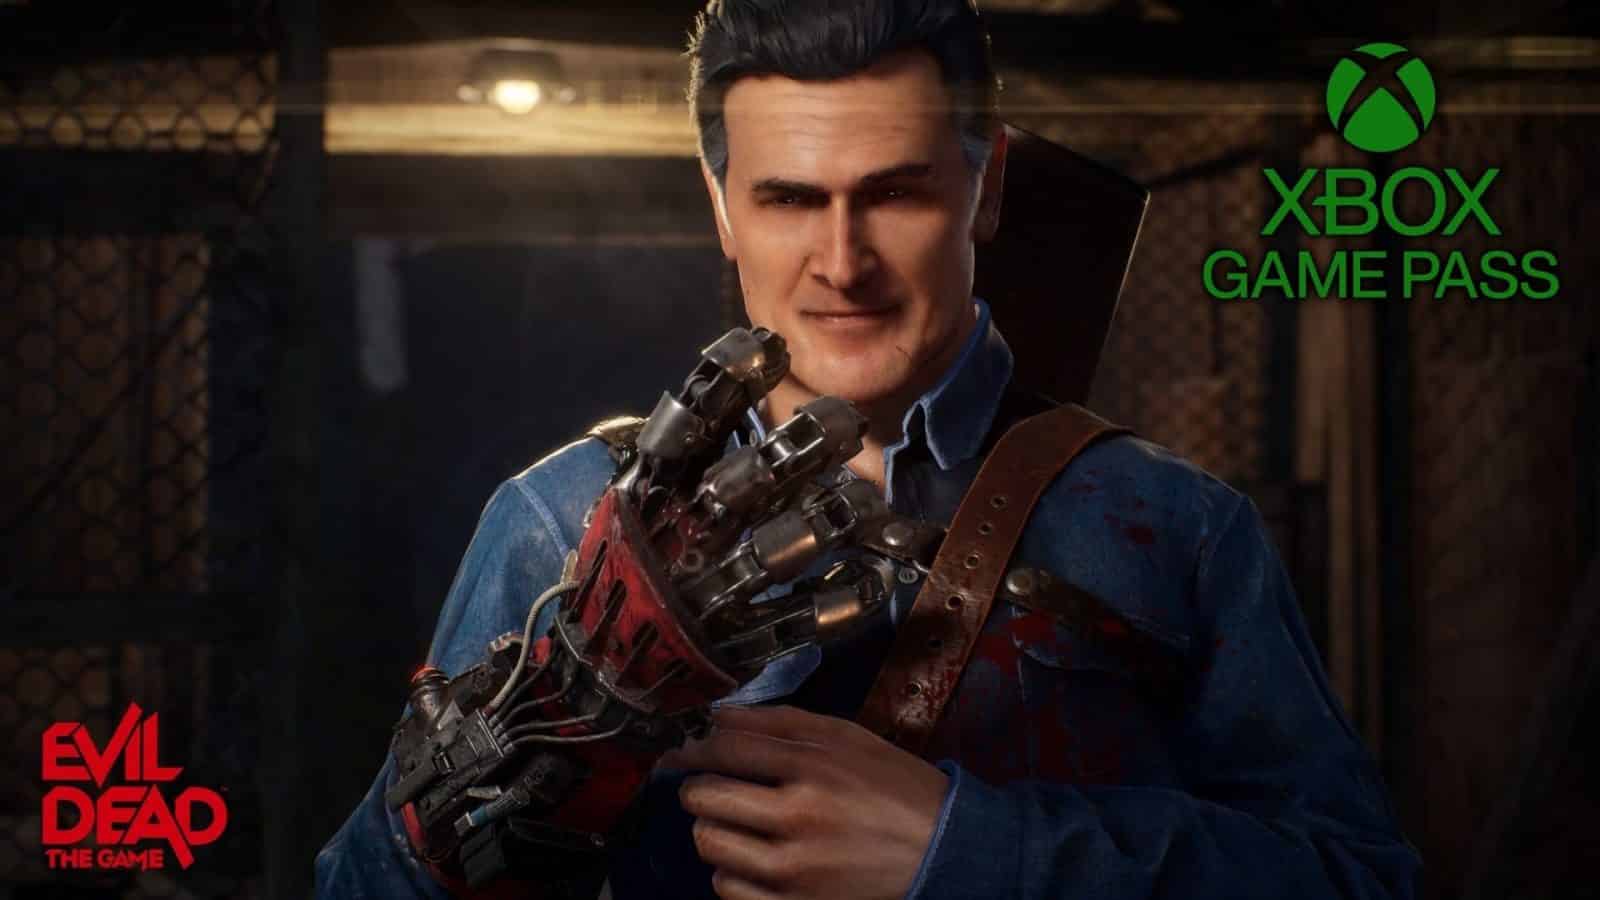 Is 'Evil Dead: The Game' Available on Xbox Game Pass?